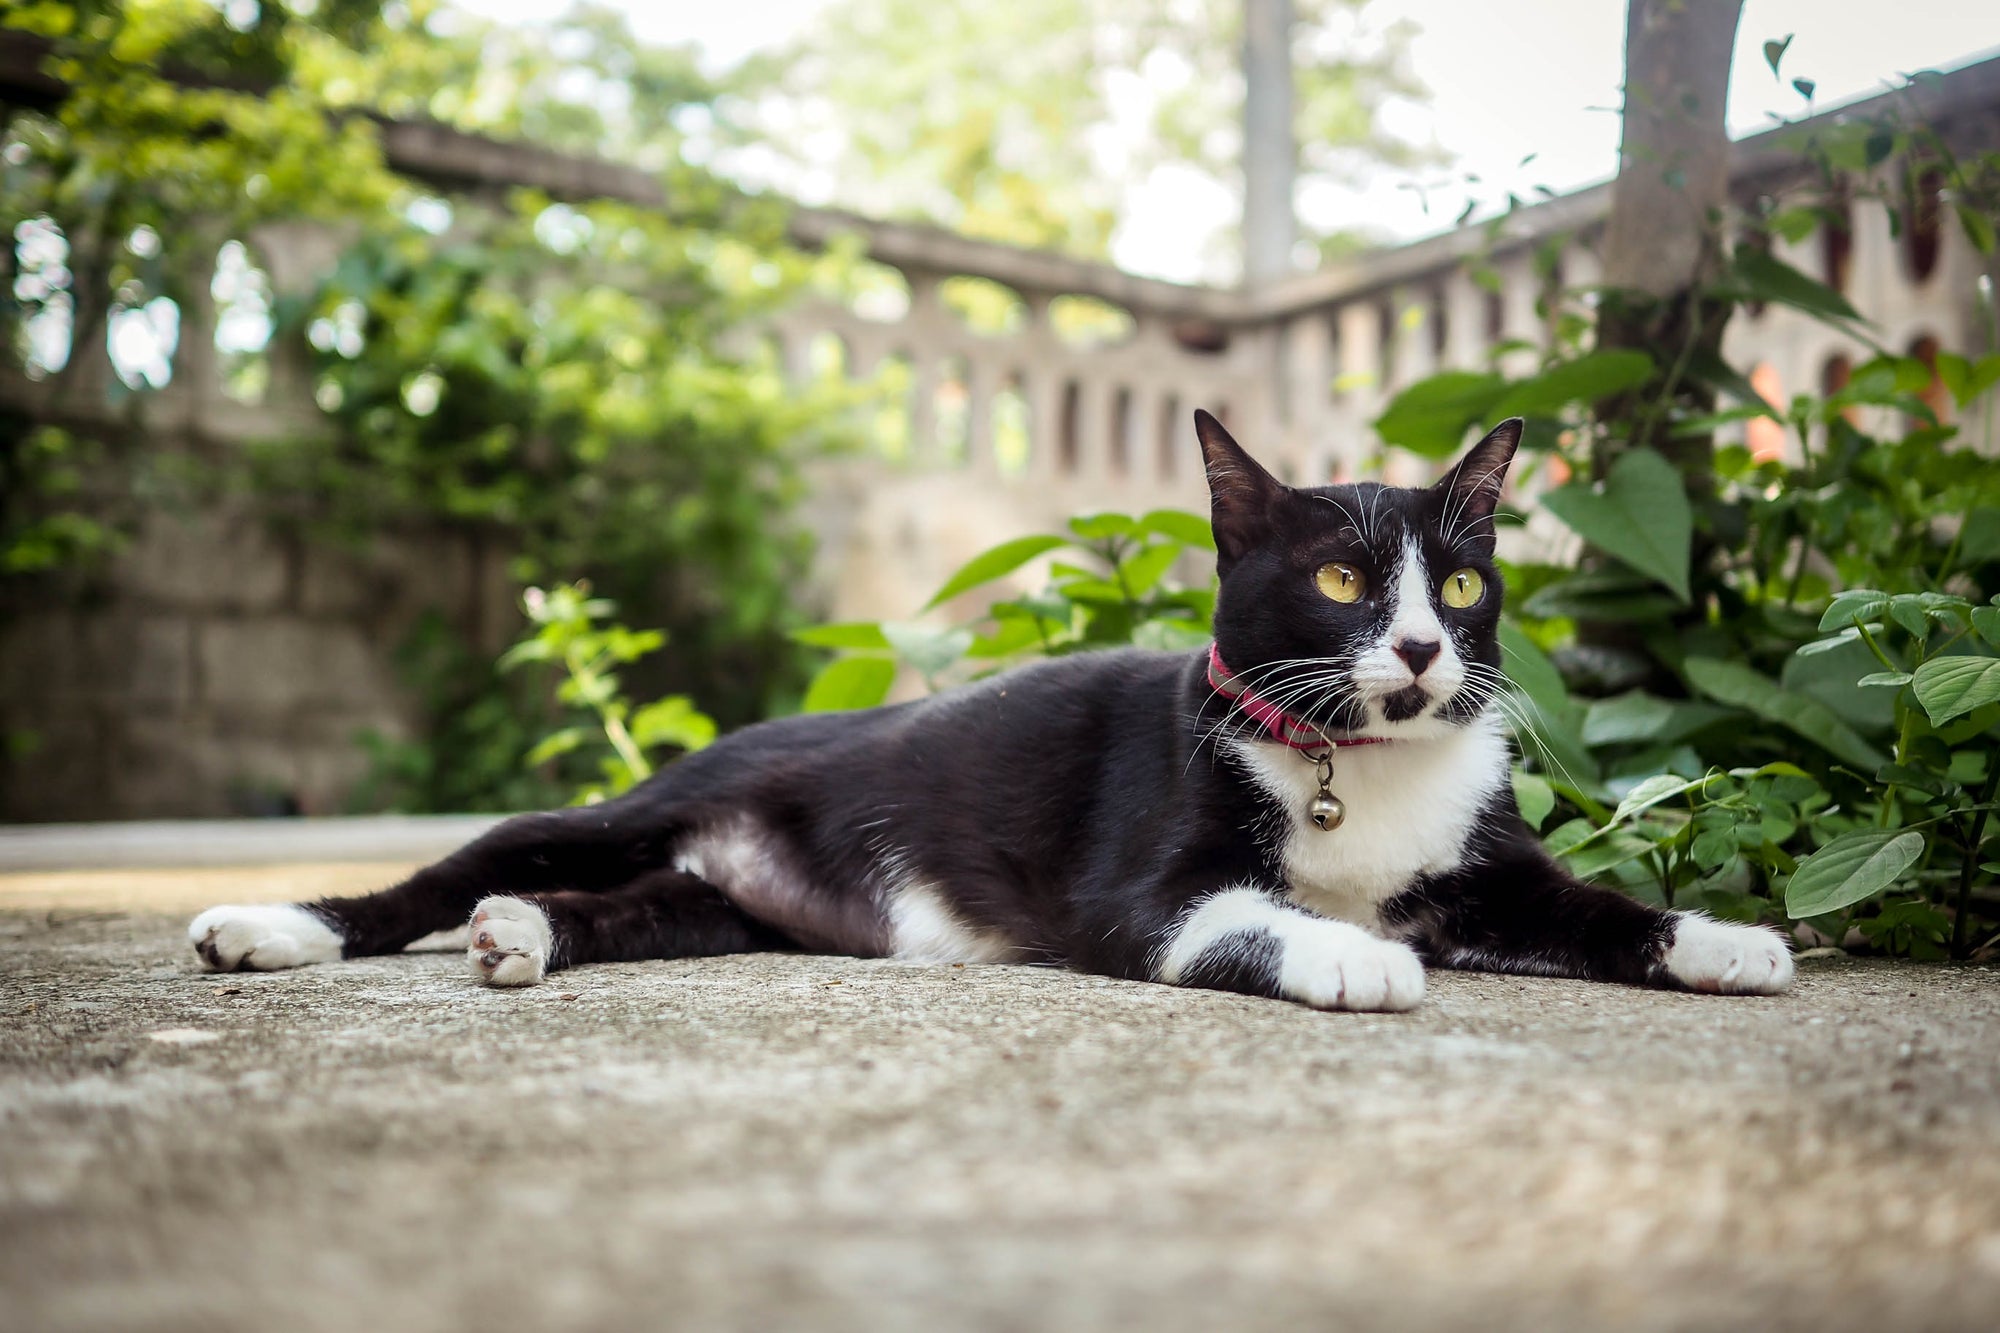 A cat lying down outdoors, with a bell on its collar.